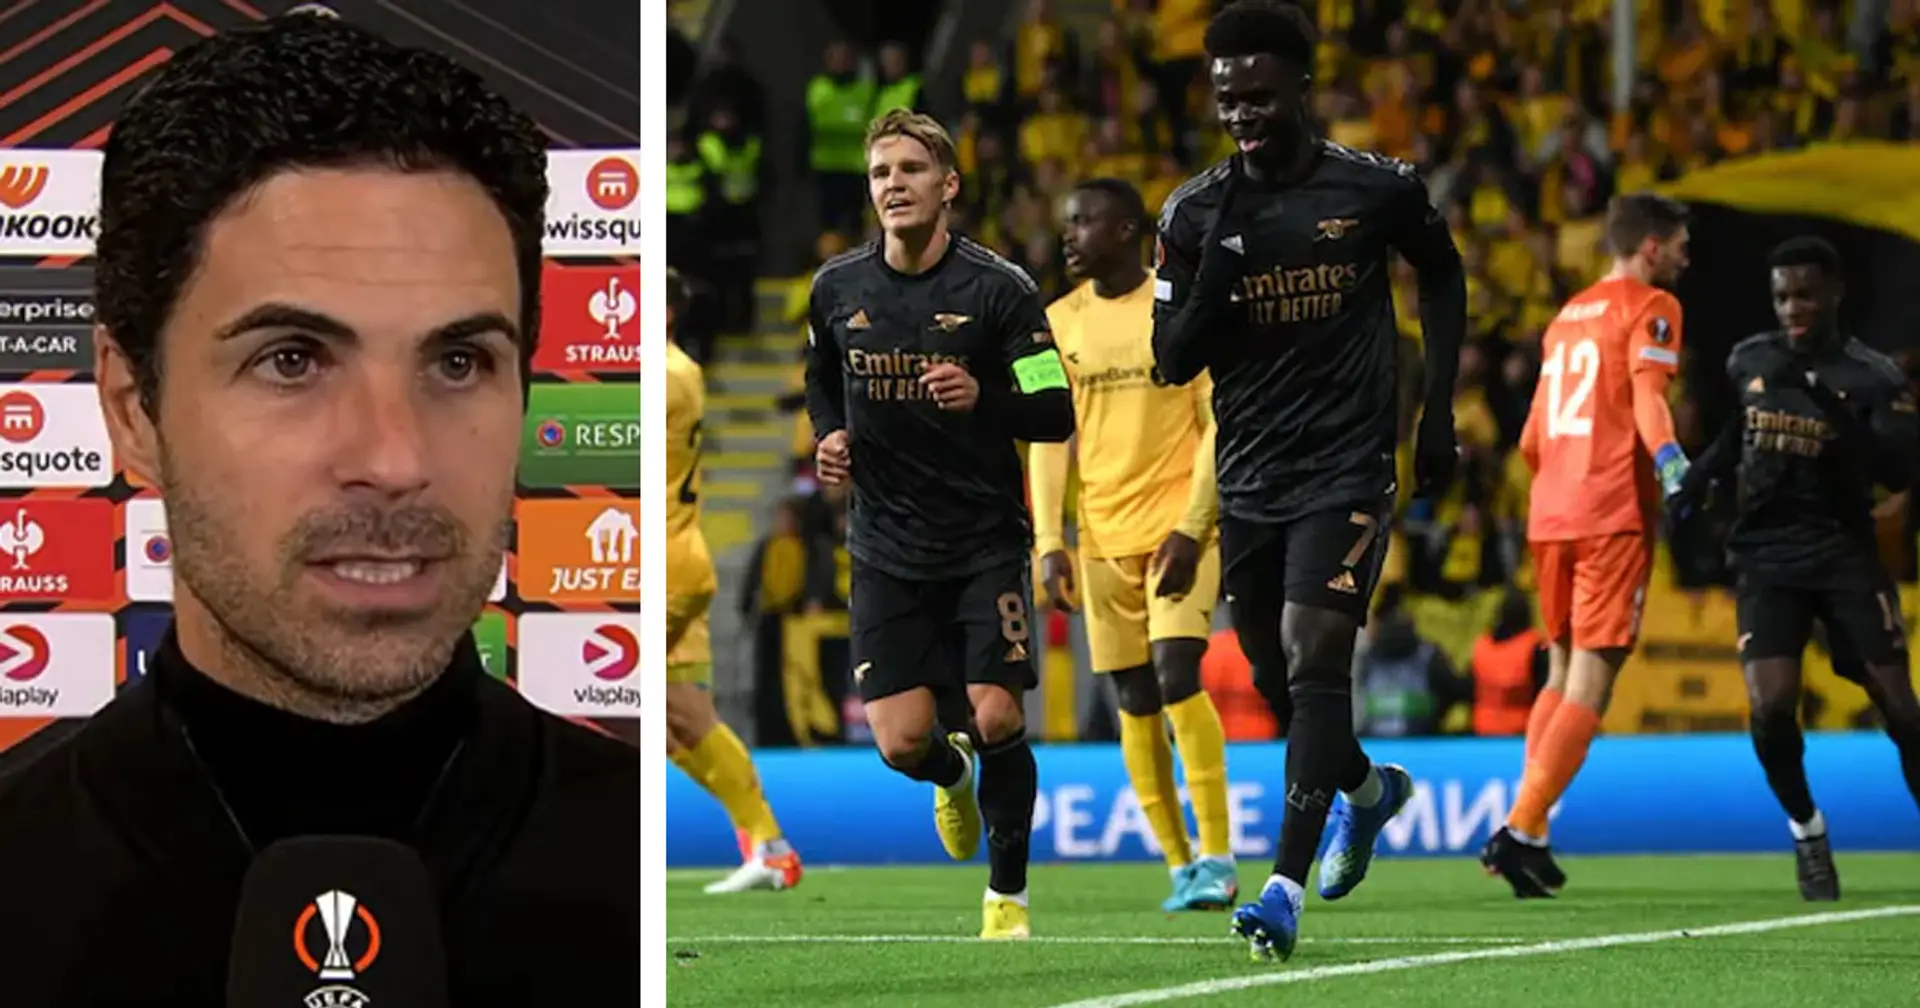 'There's a lot of things we could've done better': Arteta gives thoughts on narrow Bodo/Glimt win